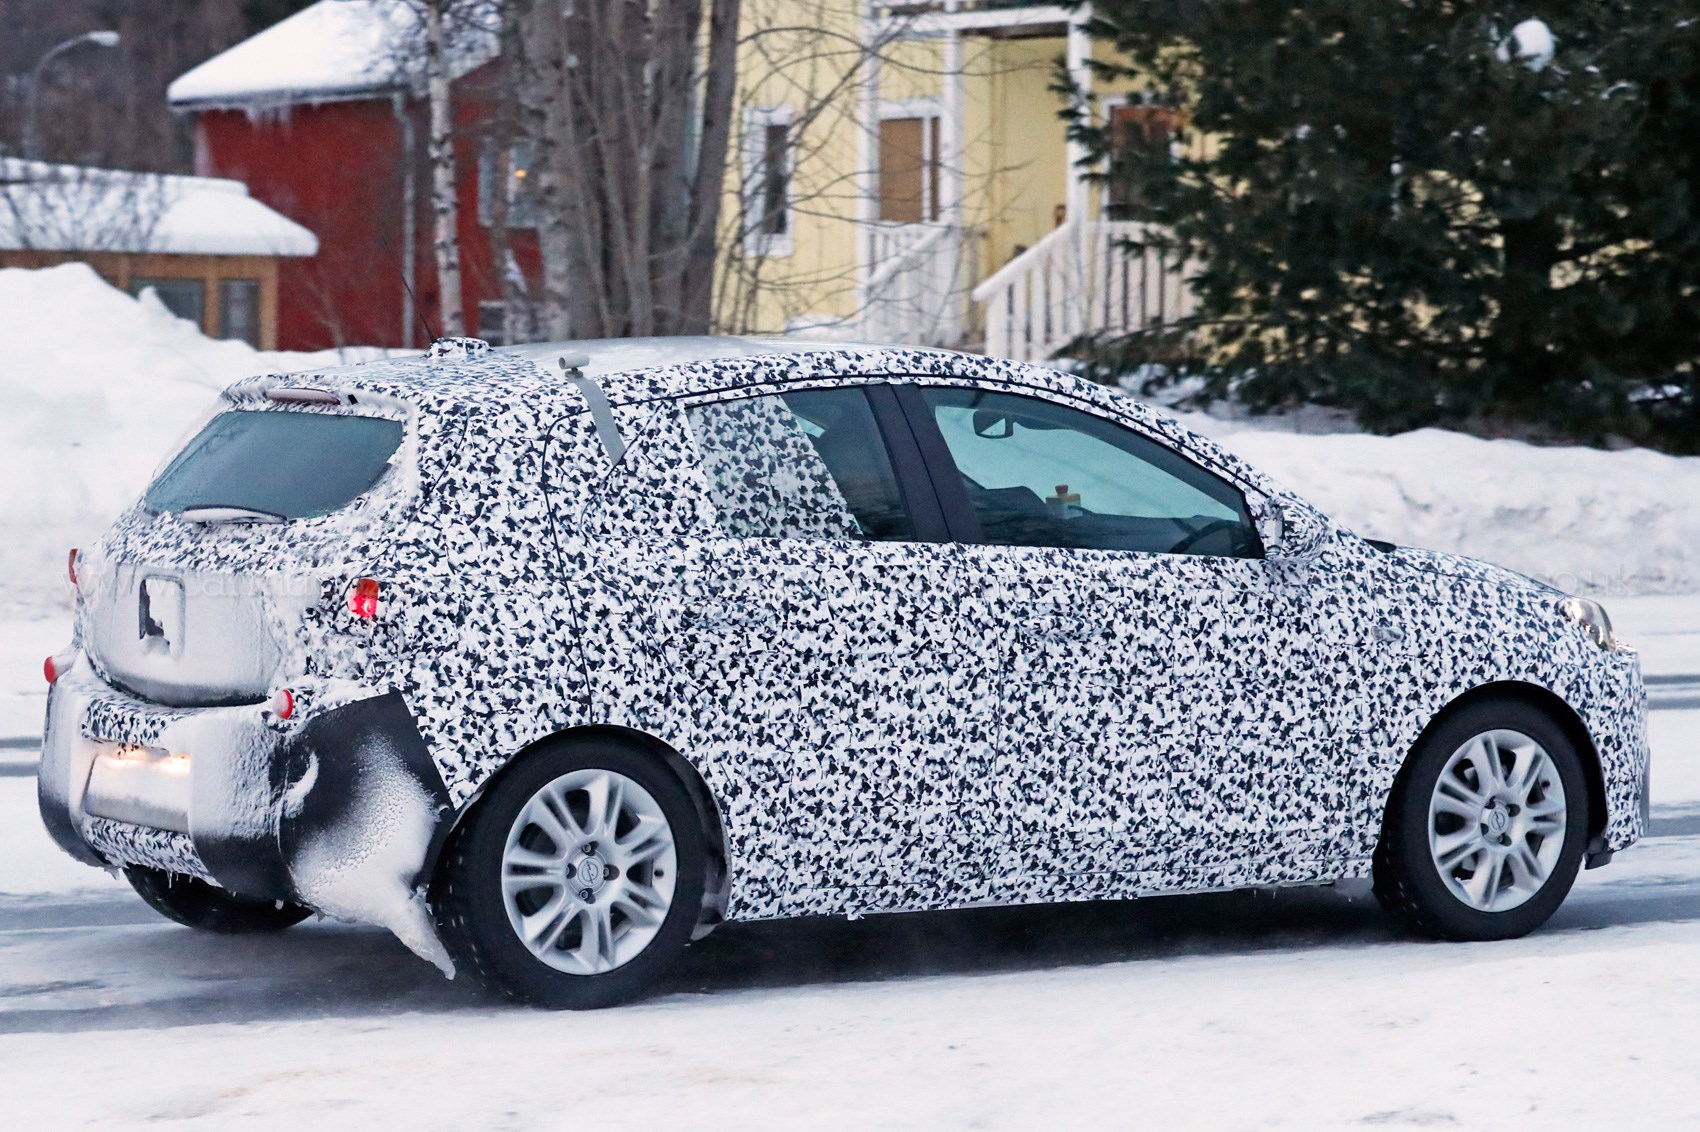 2020 Opel Corsa F Spied, Looks Different From All-New Peugeot 208